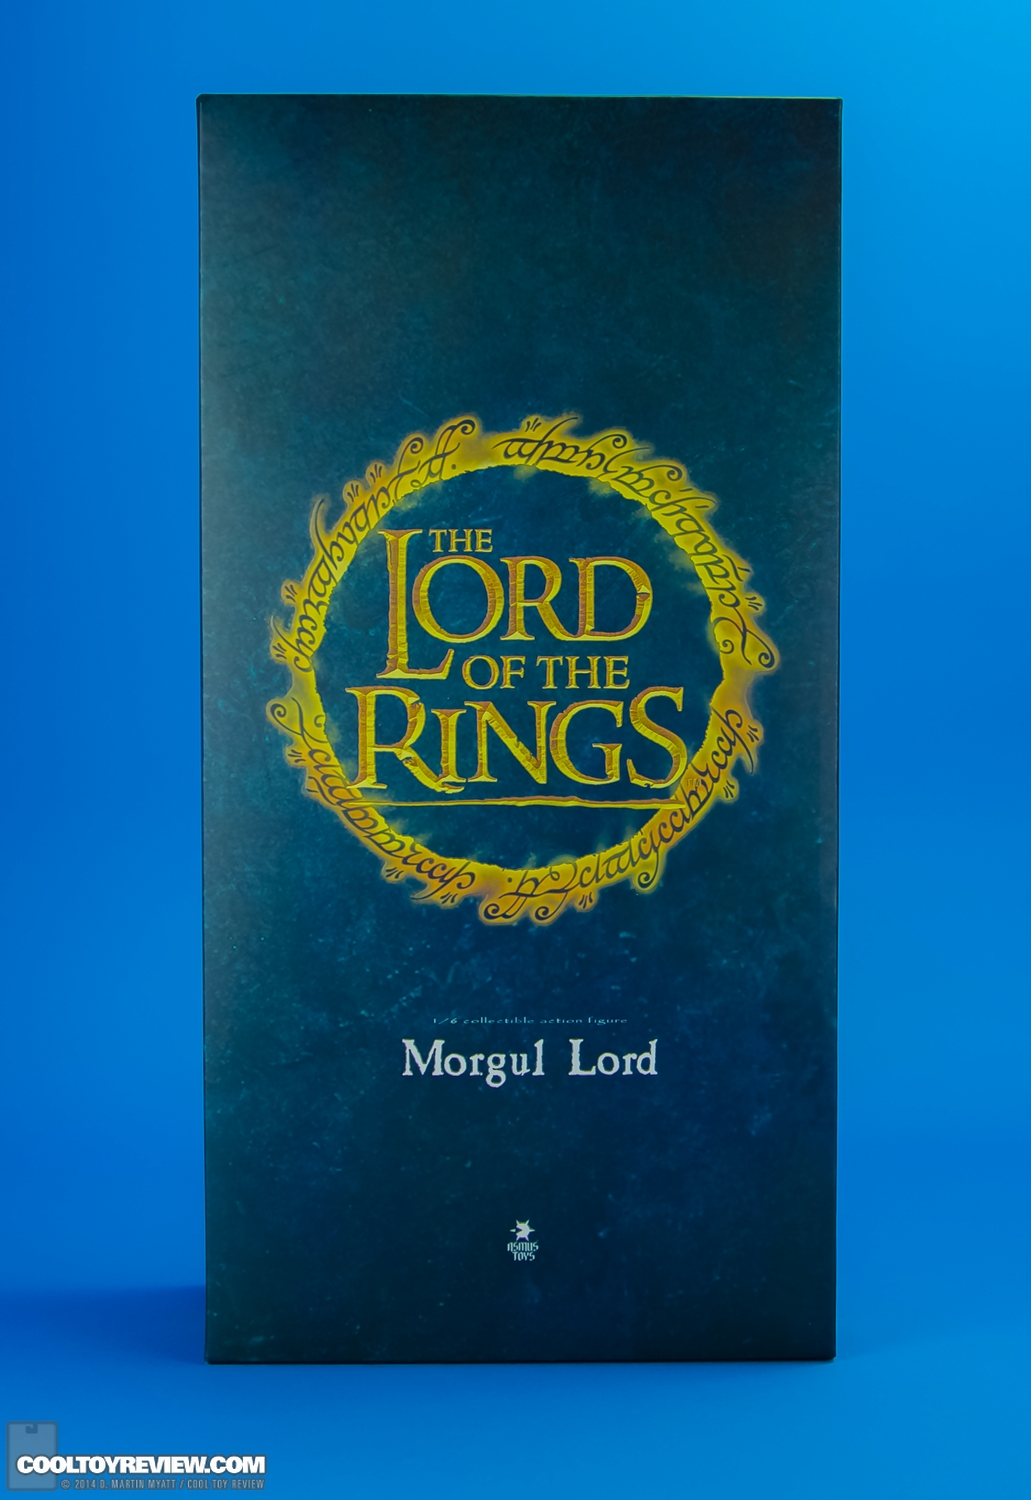 Asmus-Toys-The-Lord-Of-The-Rings-Morgul-Lord-021.jpg